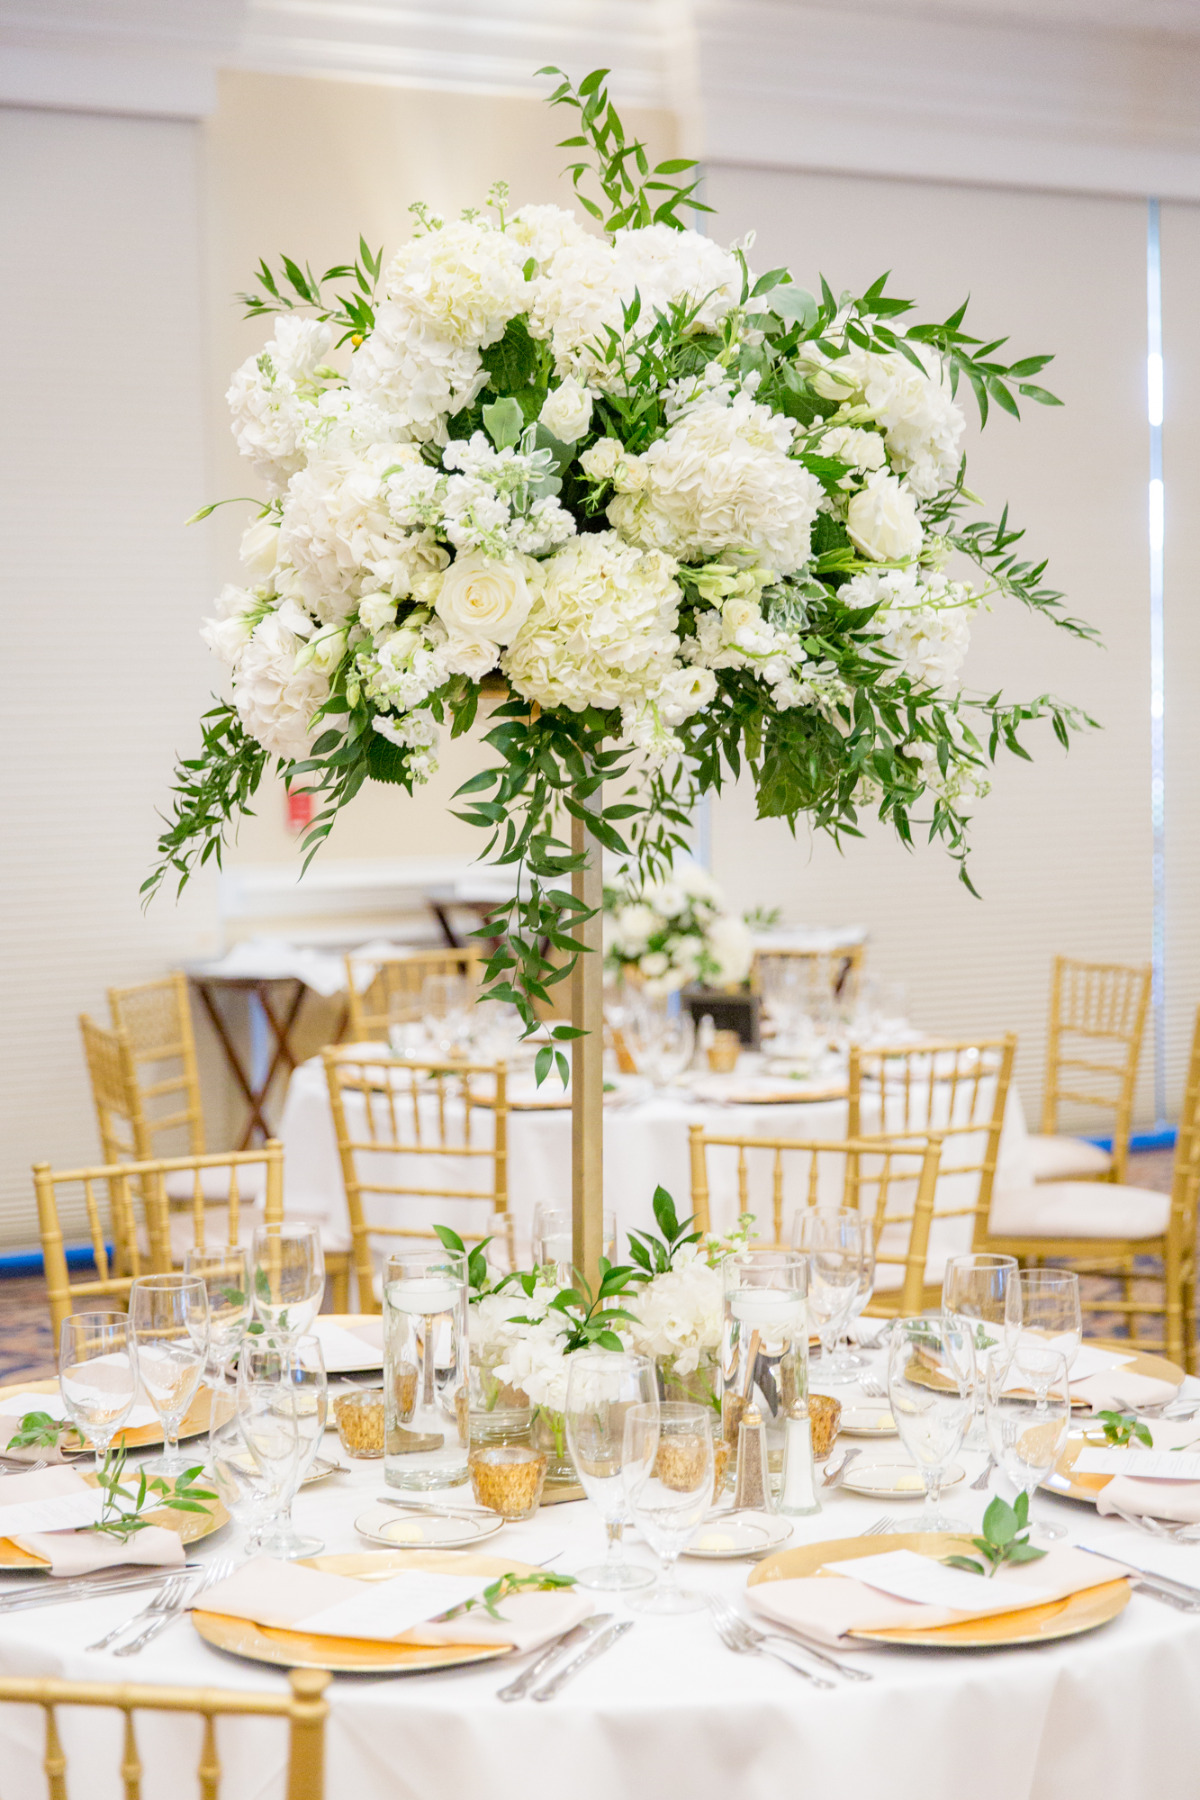 Tall white and green centerpiece